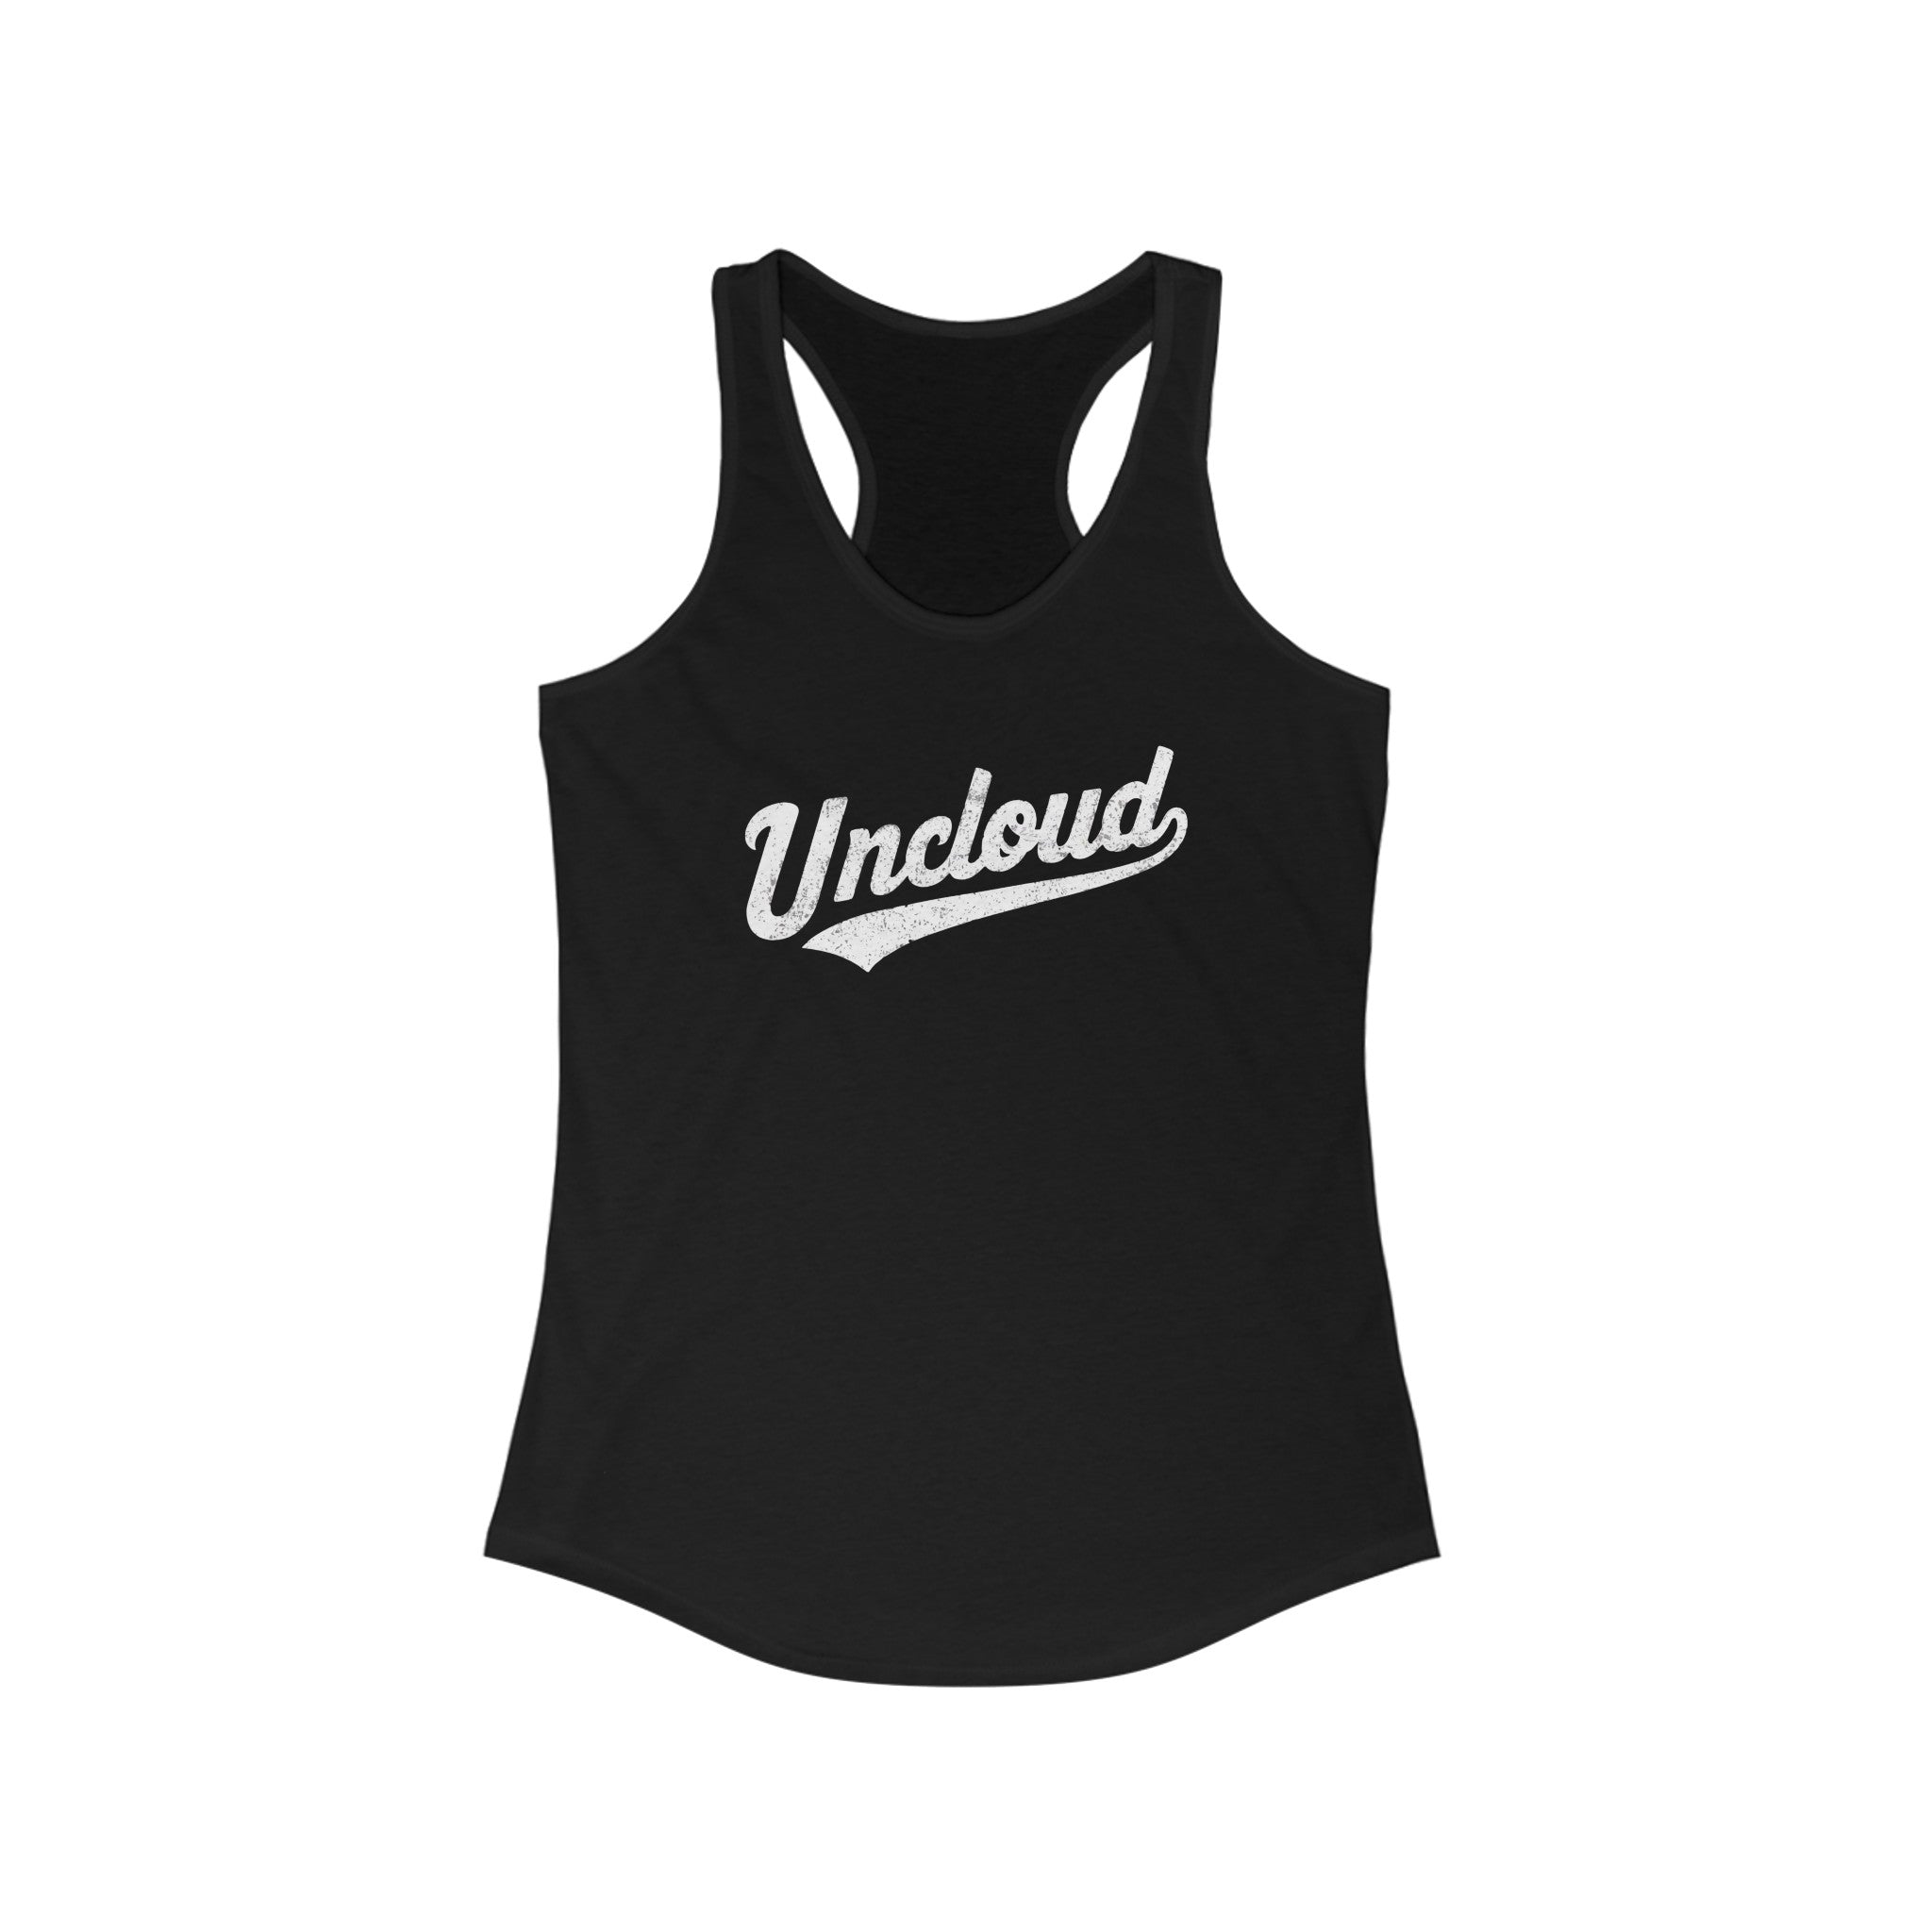 A Uncloud - Women's Racerback Tank in black, perfect for your active lifestyle, with the word "Uncloud" tastefully written in white cursive text across the chest. Ideal for workouts and casual wear alike.